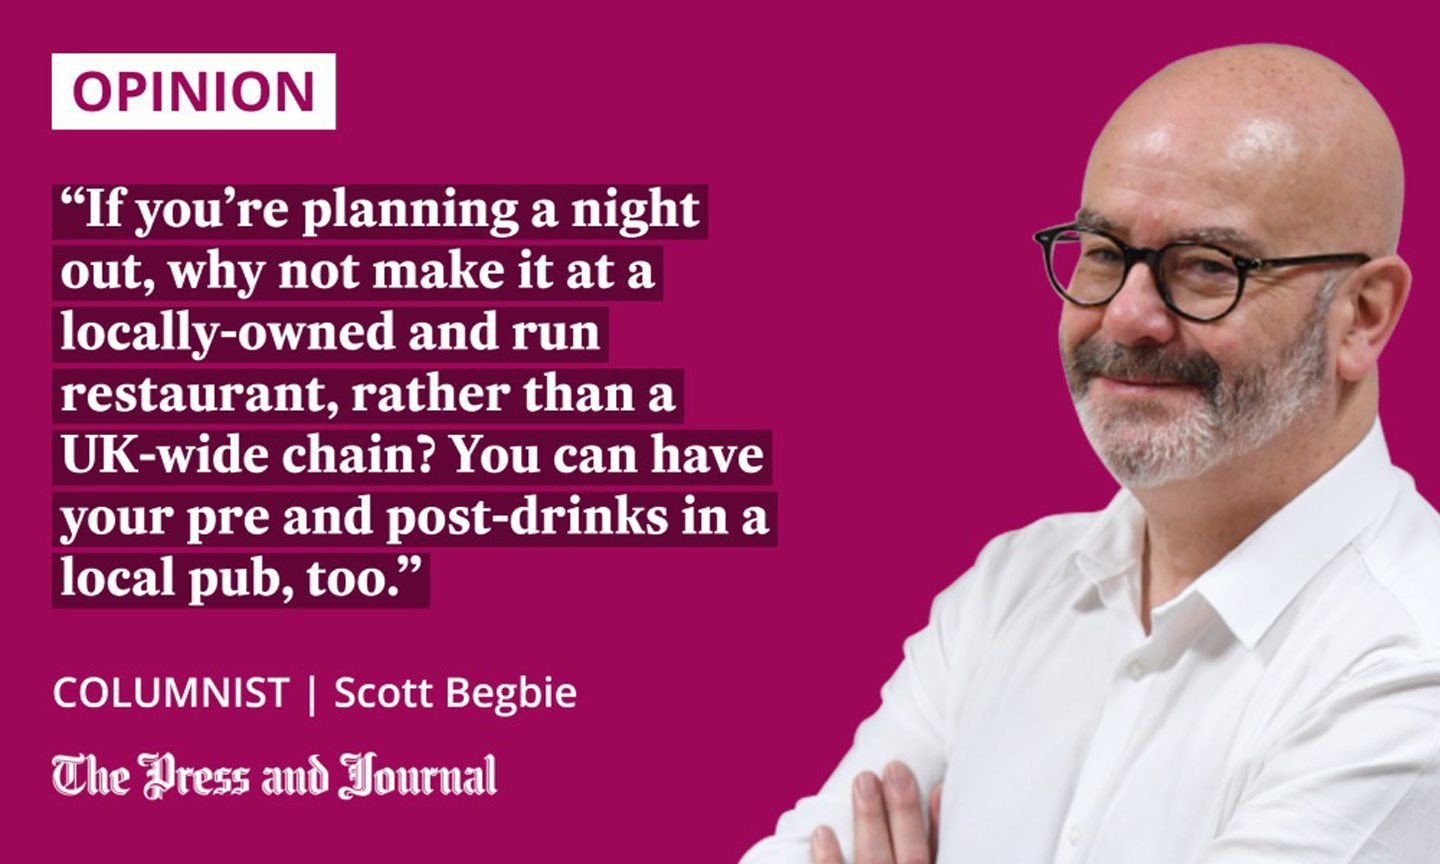 Scott Begbie talks about shopping local this christmas: "If you’re planning a night out, why not make it at a locally-owned and run restaurant, rather than a UK-wide chain? You can have your pre and post-drinks in a local pub, too."